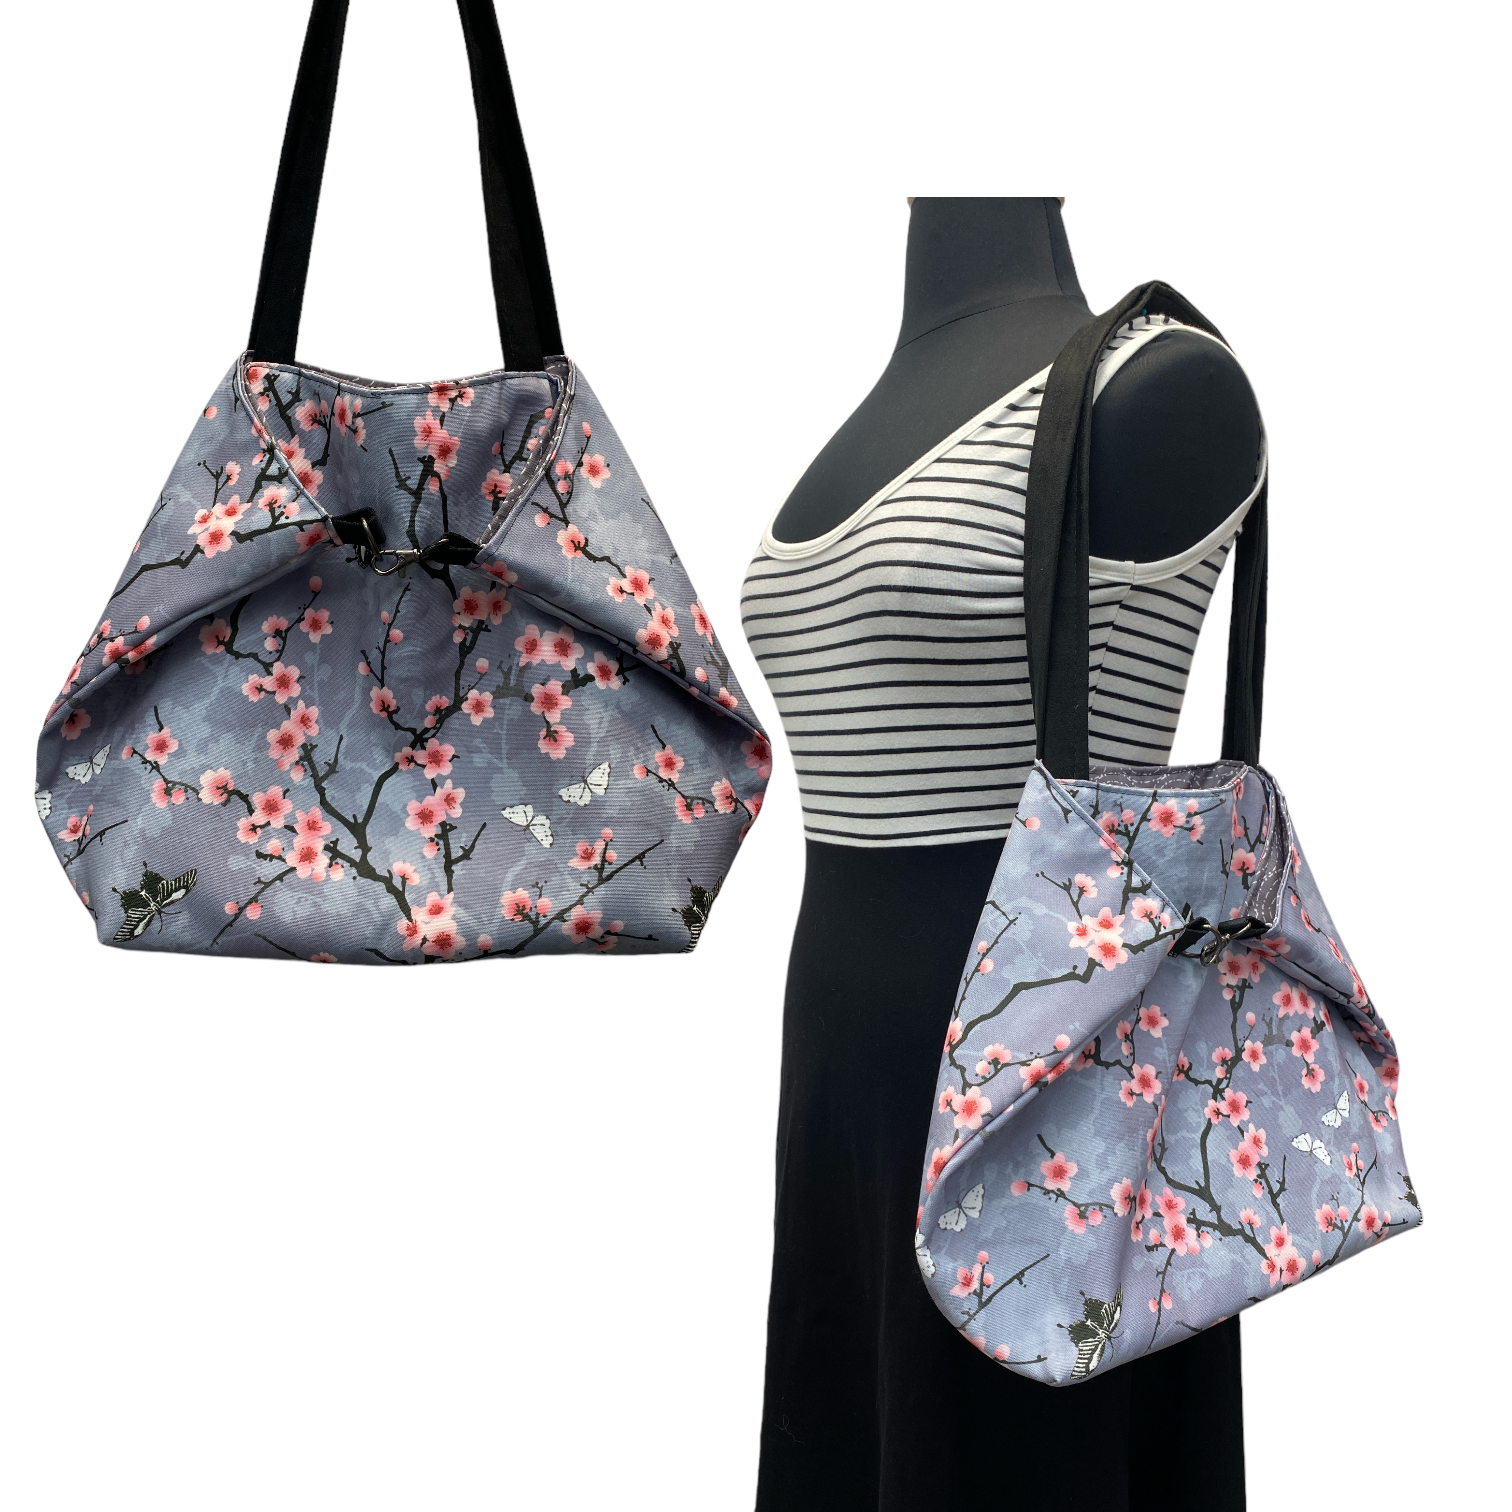 Simple Sack TOTE - Cherry Blossoms